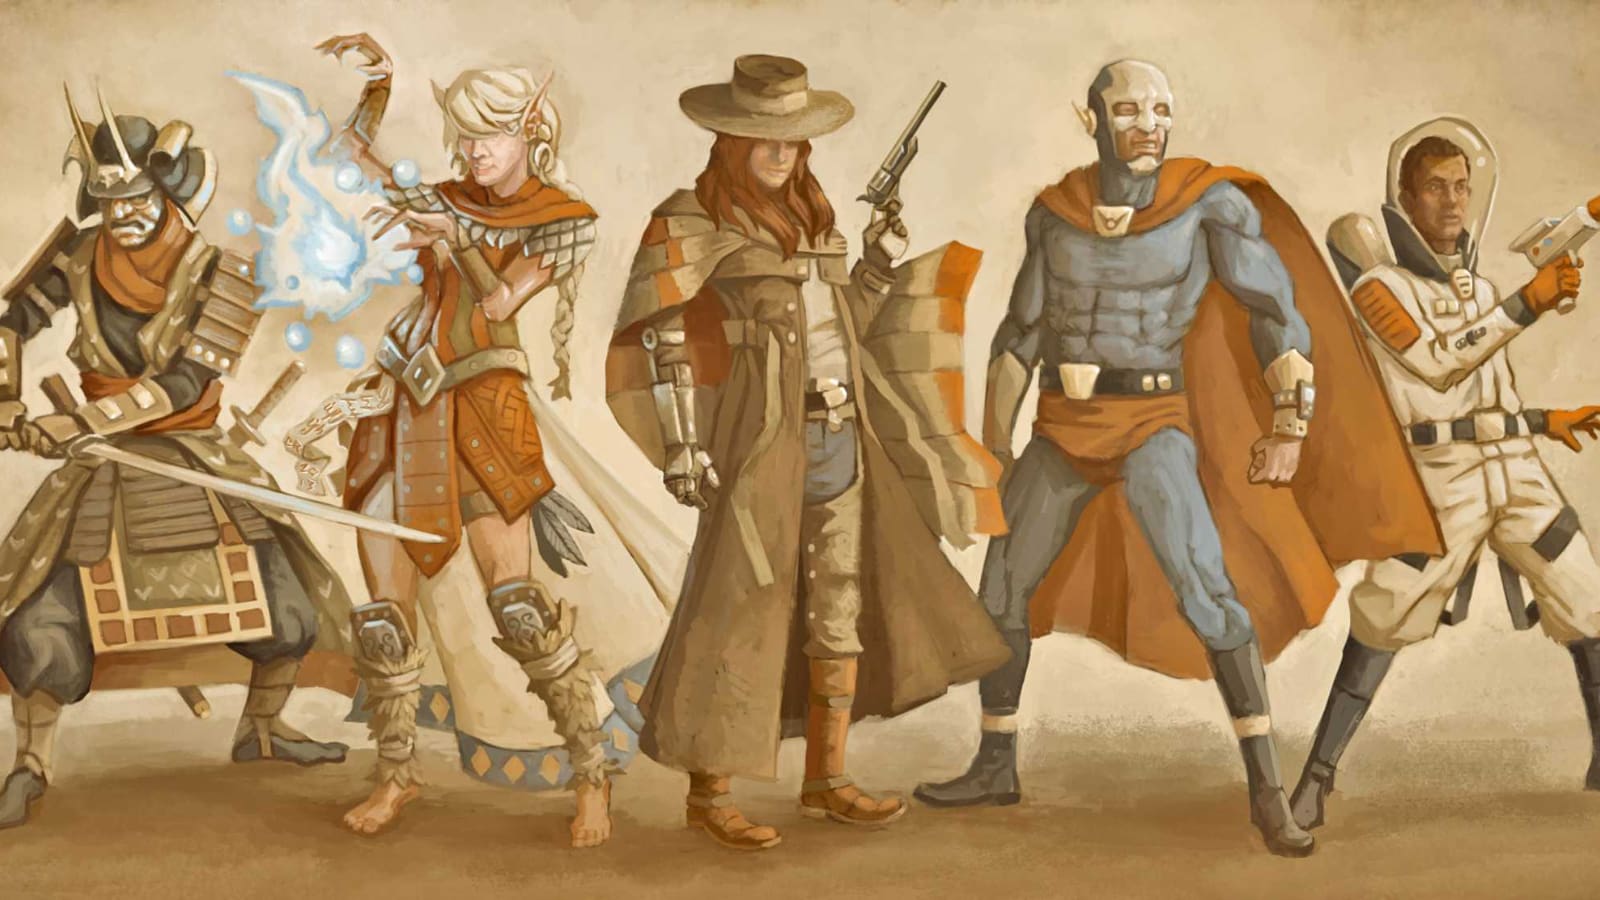 The original Learn Tabletop RPGs site was graced with this marvelous hero image created by Christopher Reach.